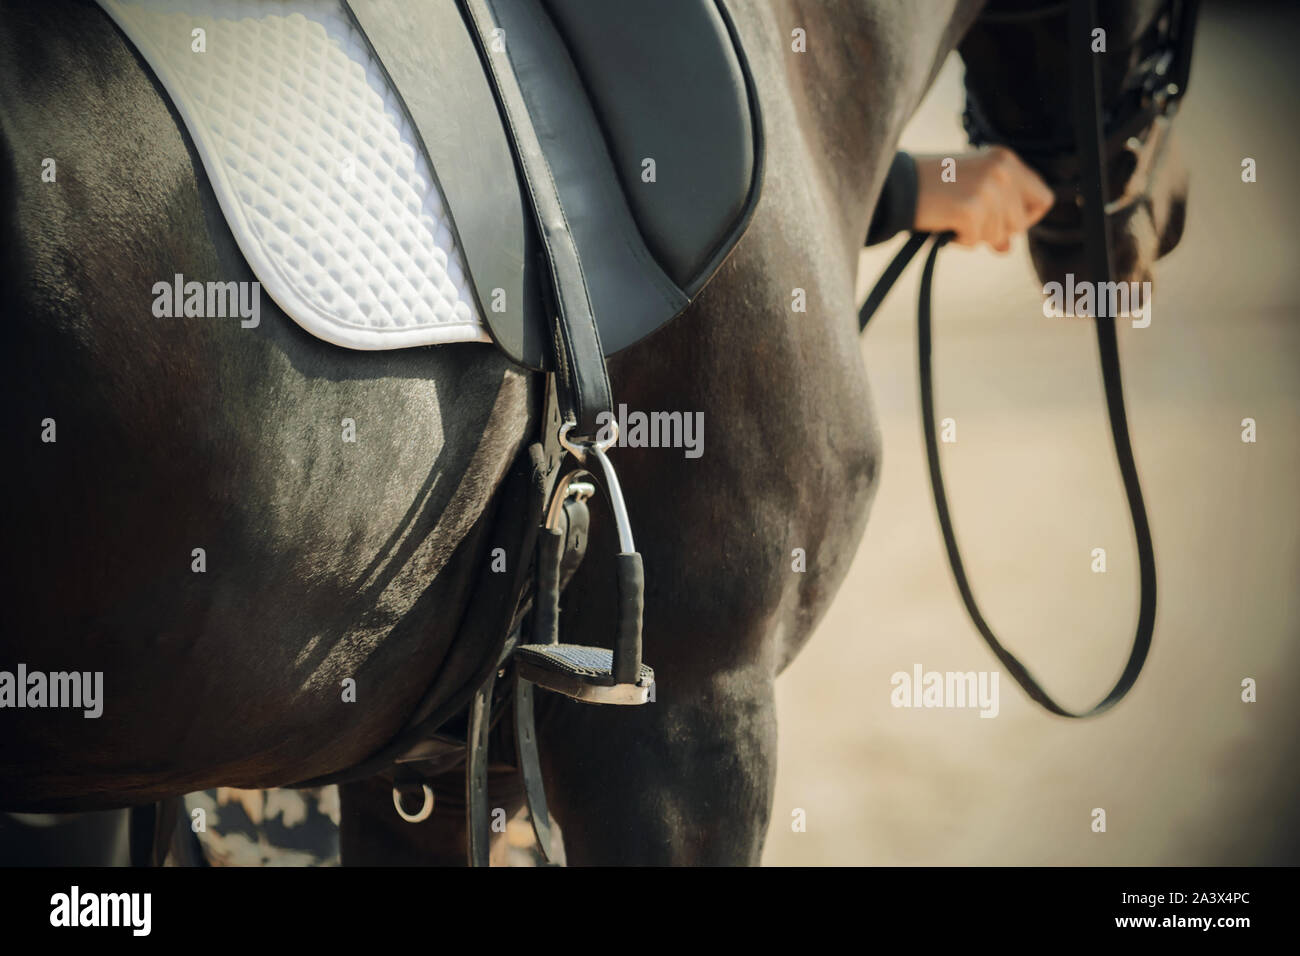 The black horse, which is held by the bridle, wears a metal stirrup, a white saddlecloth and a leather saddle, illuminated by bright sunlight. Stock Photo